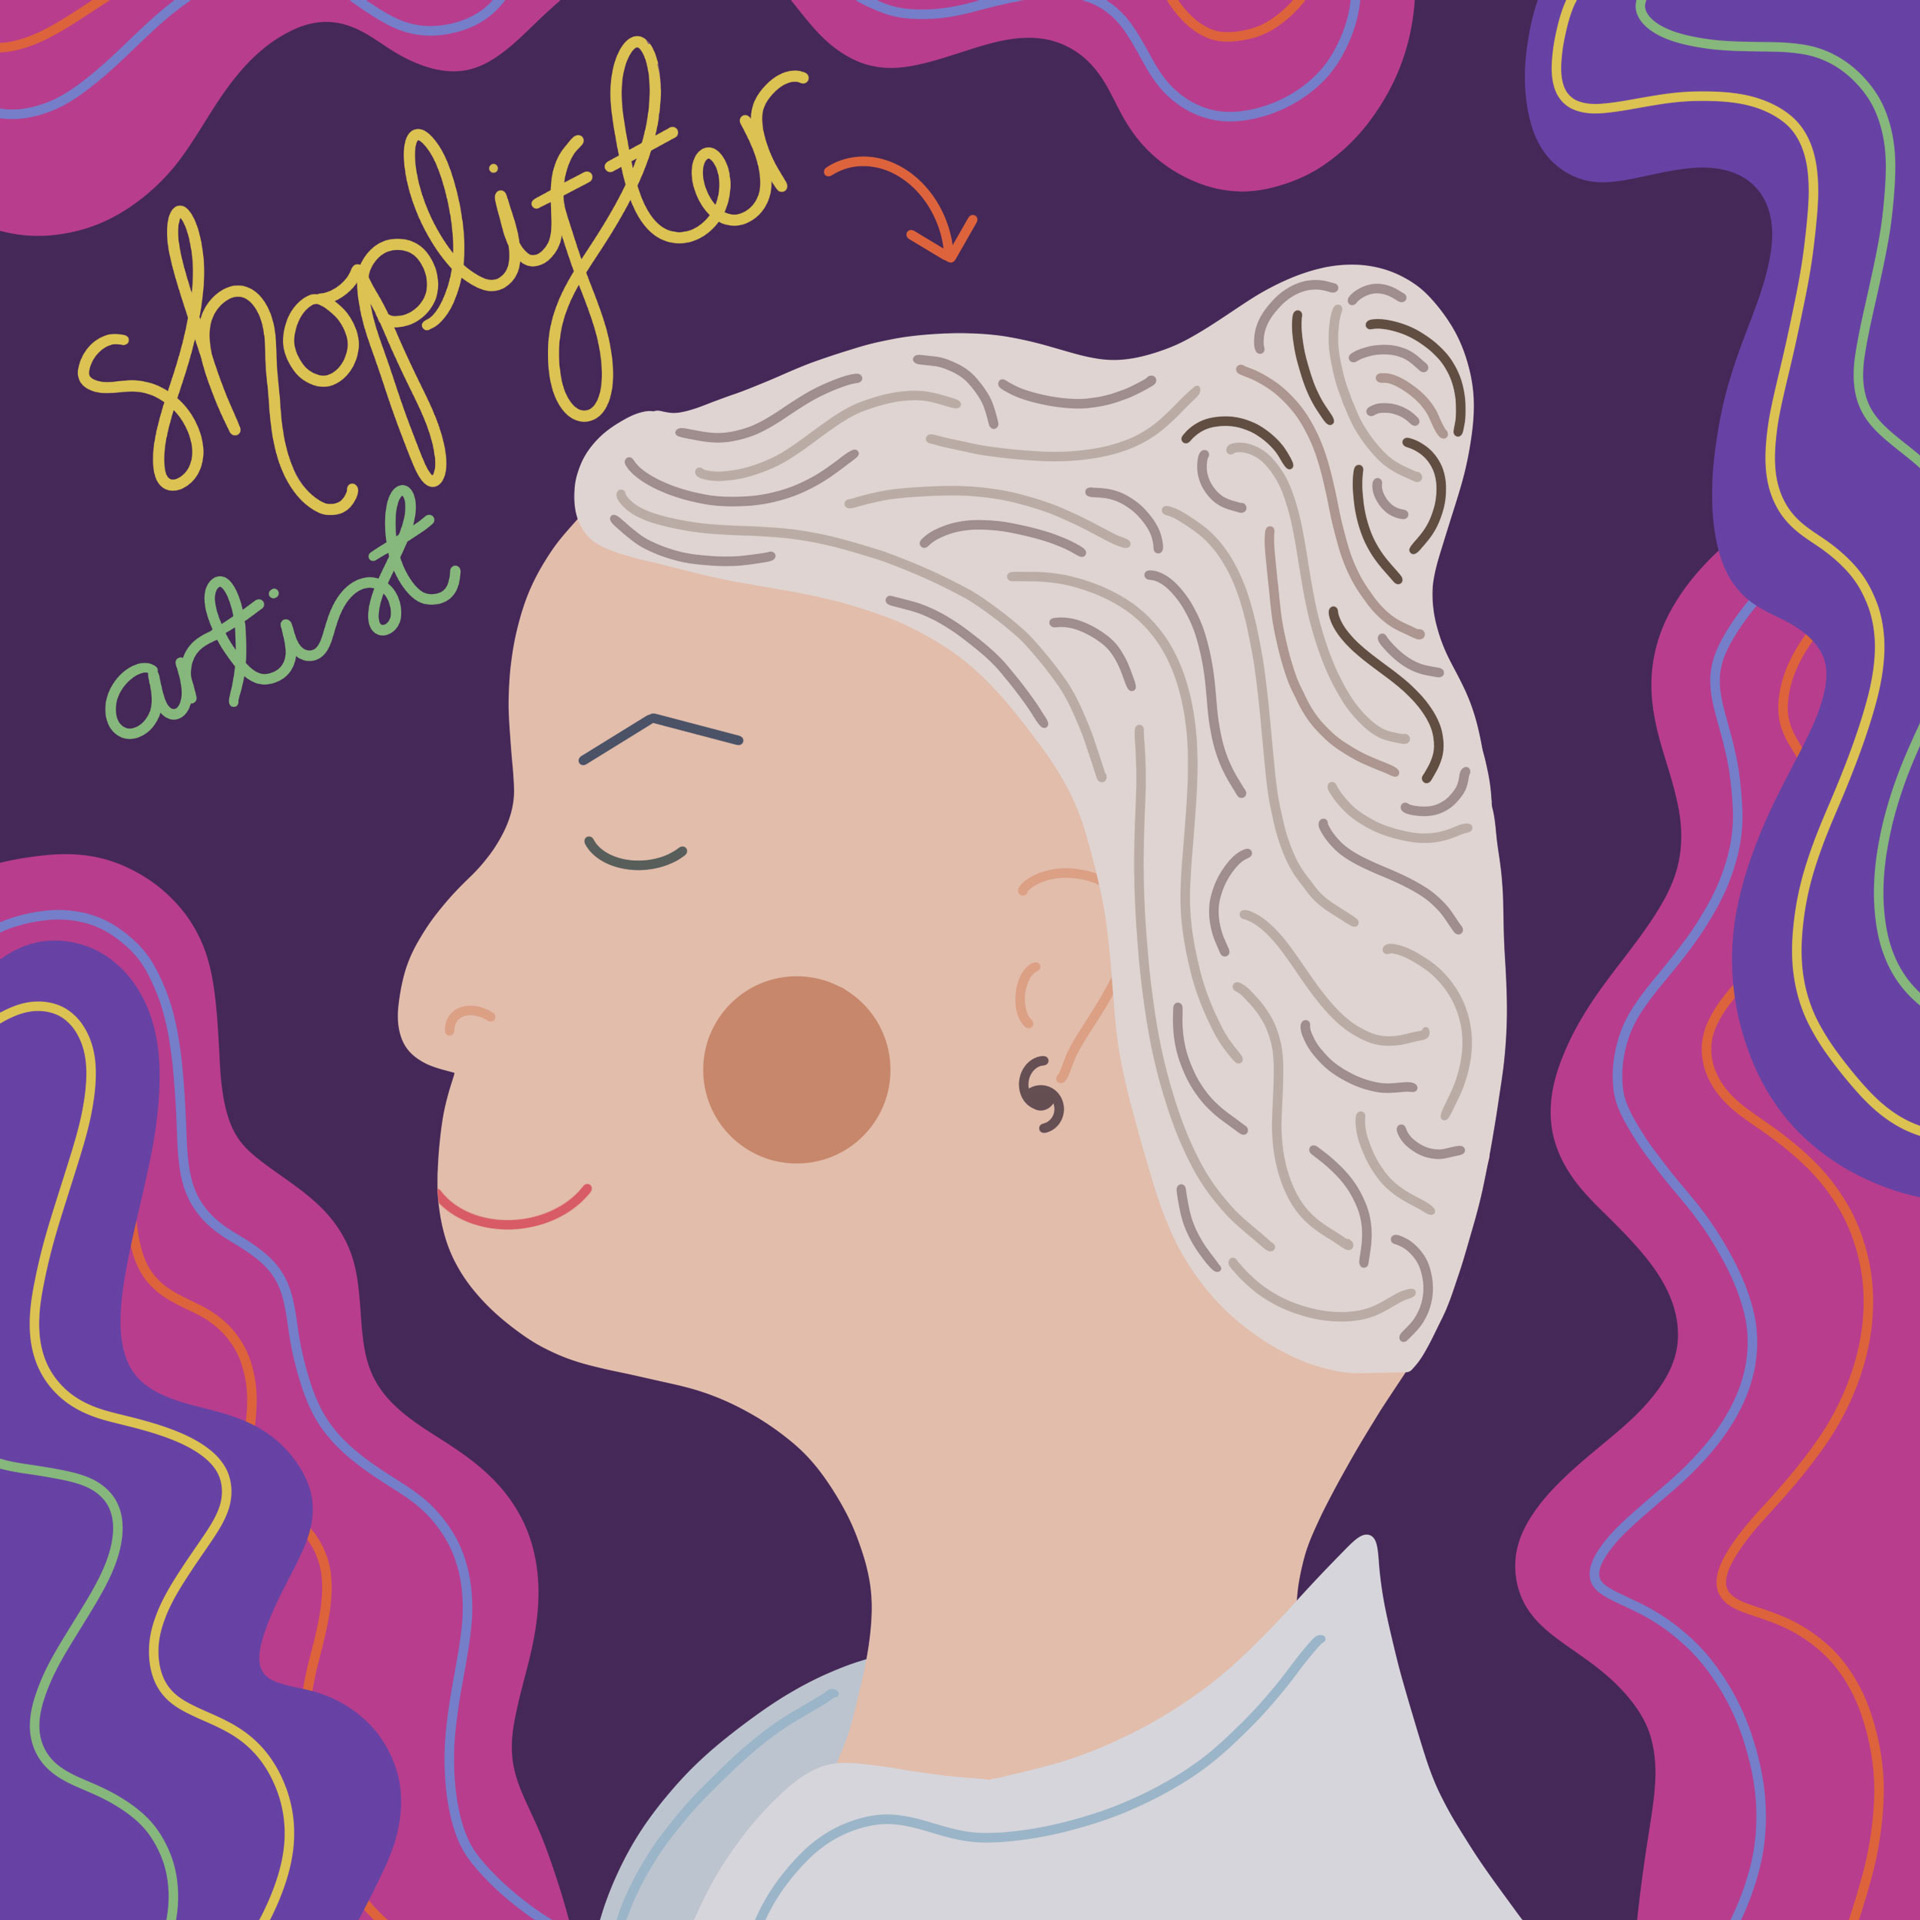 A side-profile portrait of Shoplifter illustrated in a whimsical and playful illustration style. Shoplifter is depicted at the left of the square image, surrounded by wavy patterns and shapes. A hand-drawn caption accompanies the portrait, stating 'Shoplifter: Artist'.  The illustration features a bold and striking color palette, incorporating vibrant shades of purple, pink, and yellow.